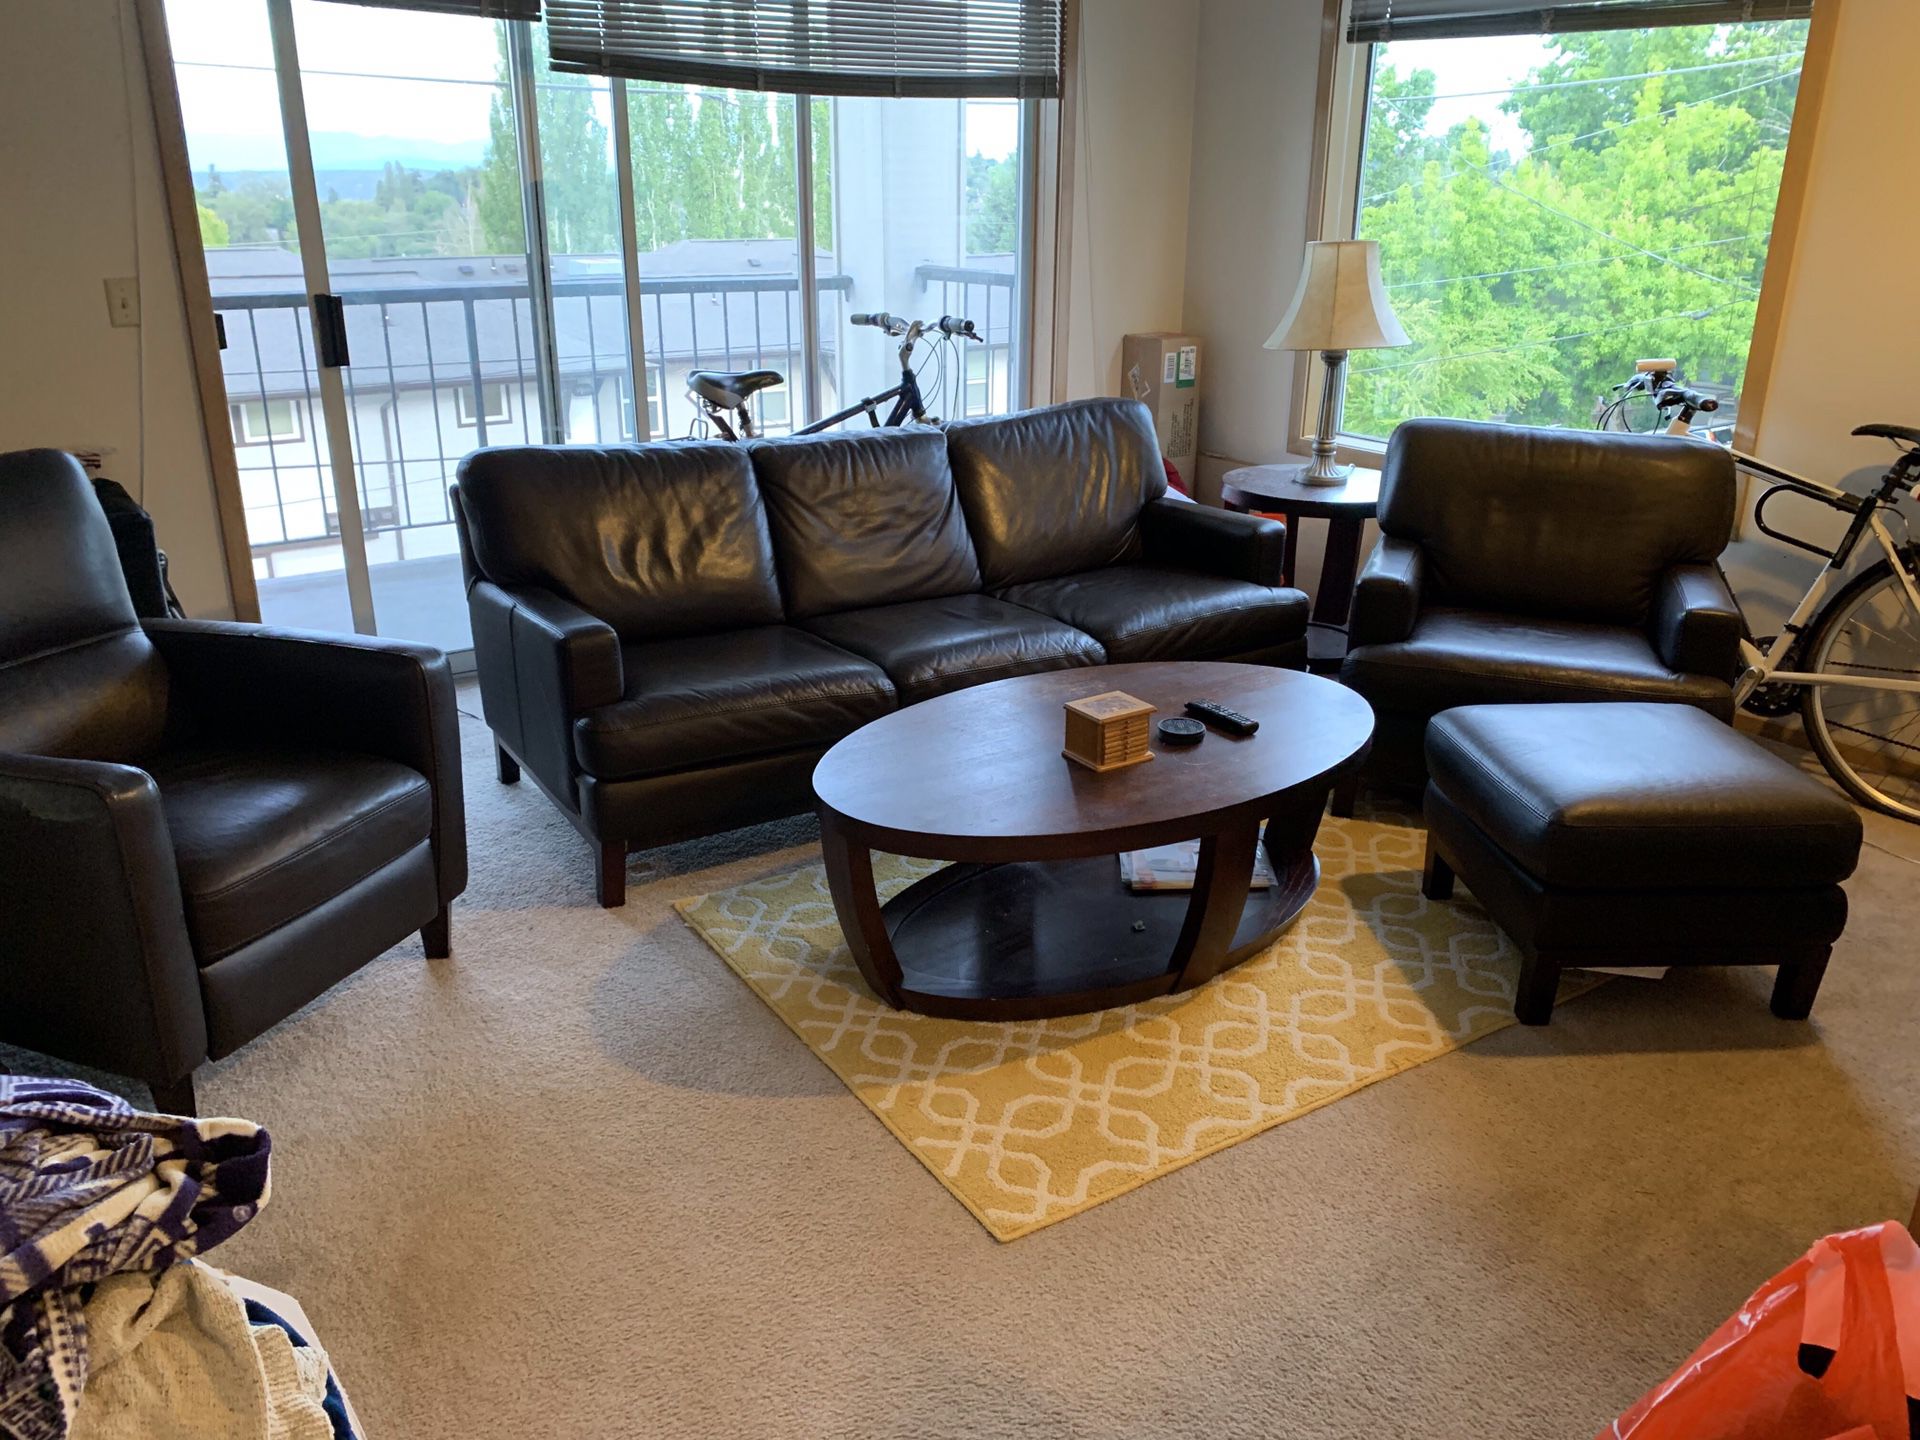 Living room set - couch, sofa with ottoman, recliner, coffee table, side table and lamp!